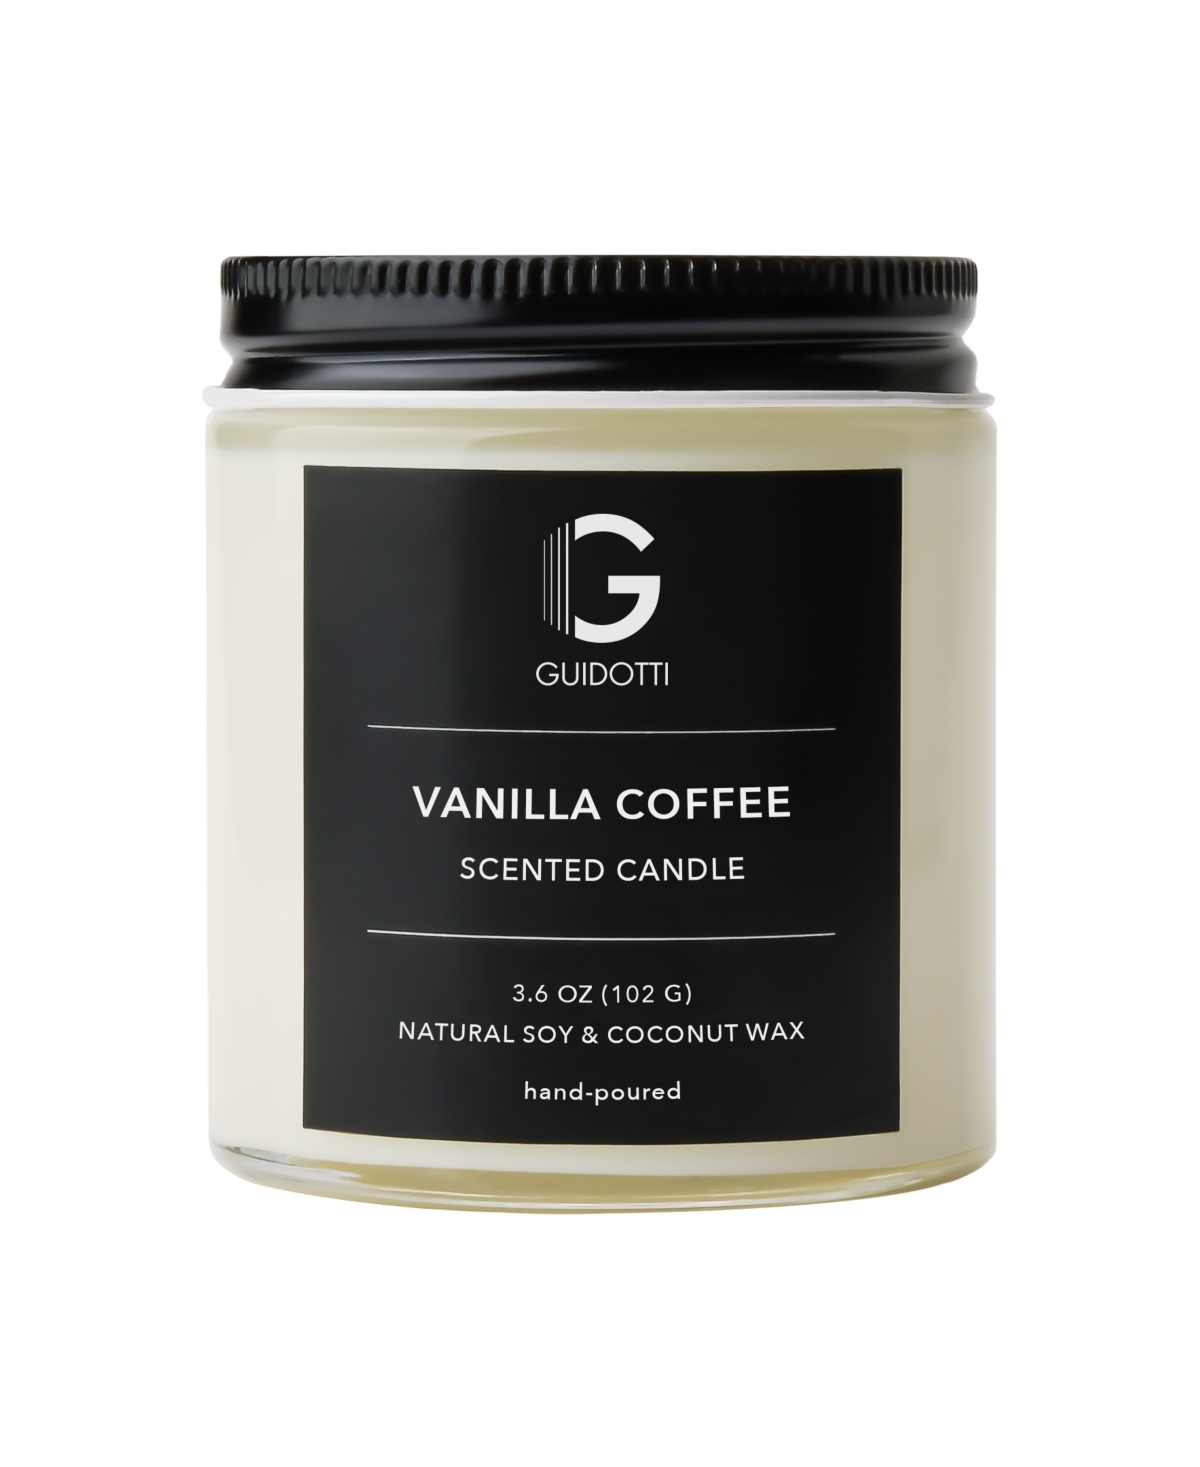 Vanilla Coffee Scented Candle, 1-Wick, 3.6 oz